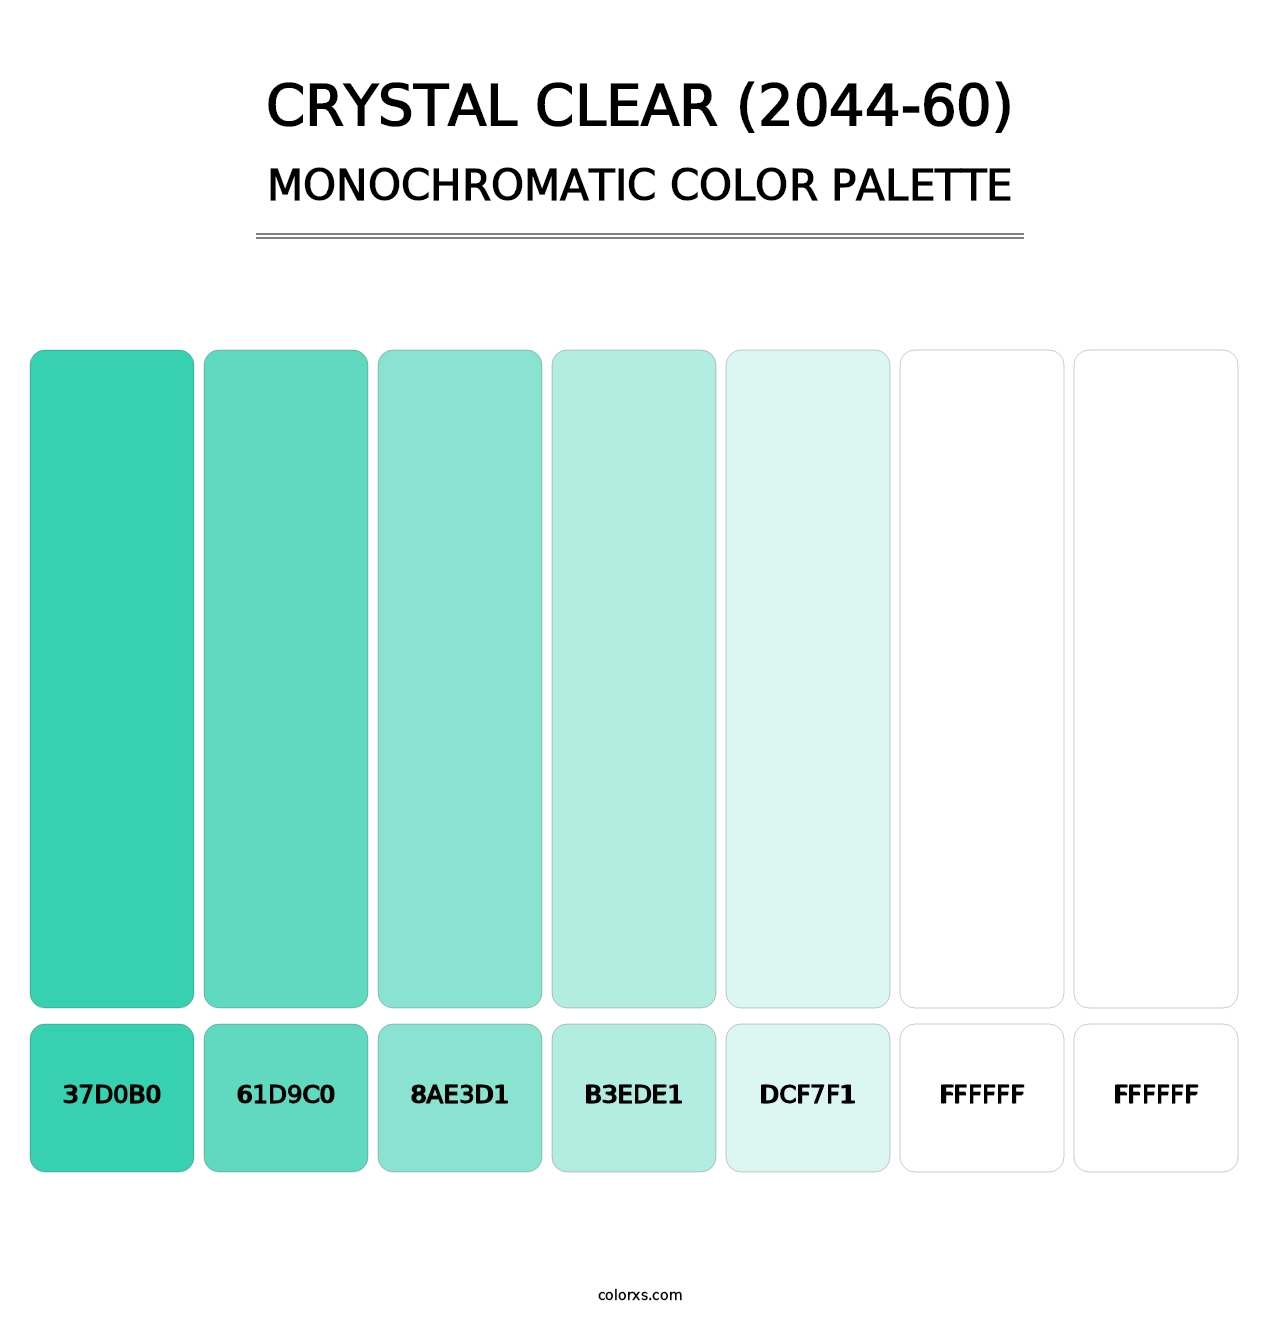 Crystal Clear (2044-60) - Monochromatic Color Palette